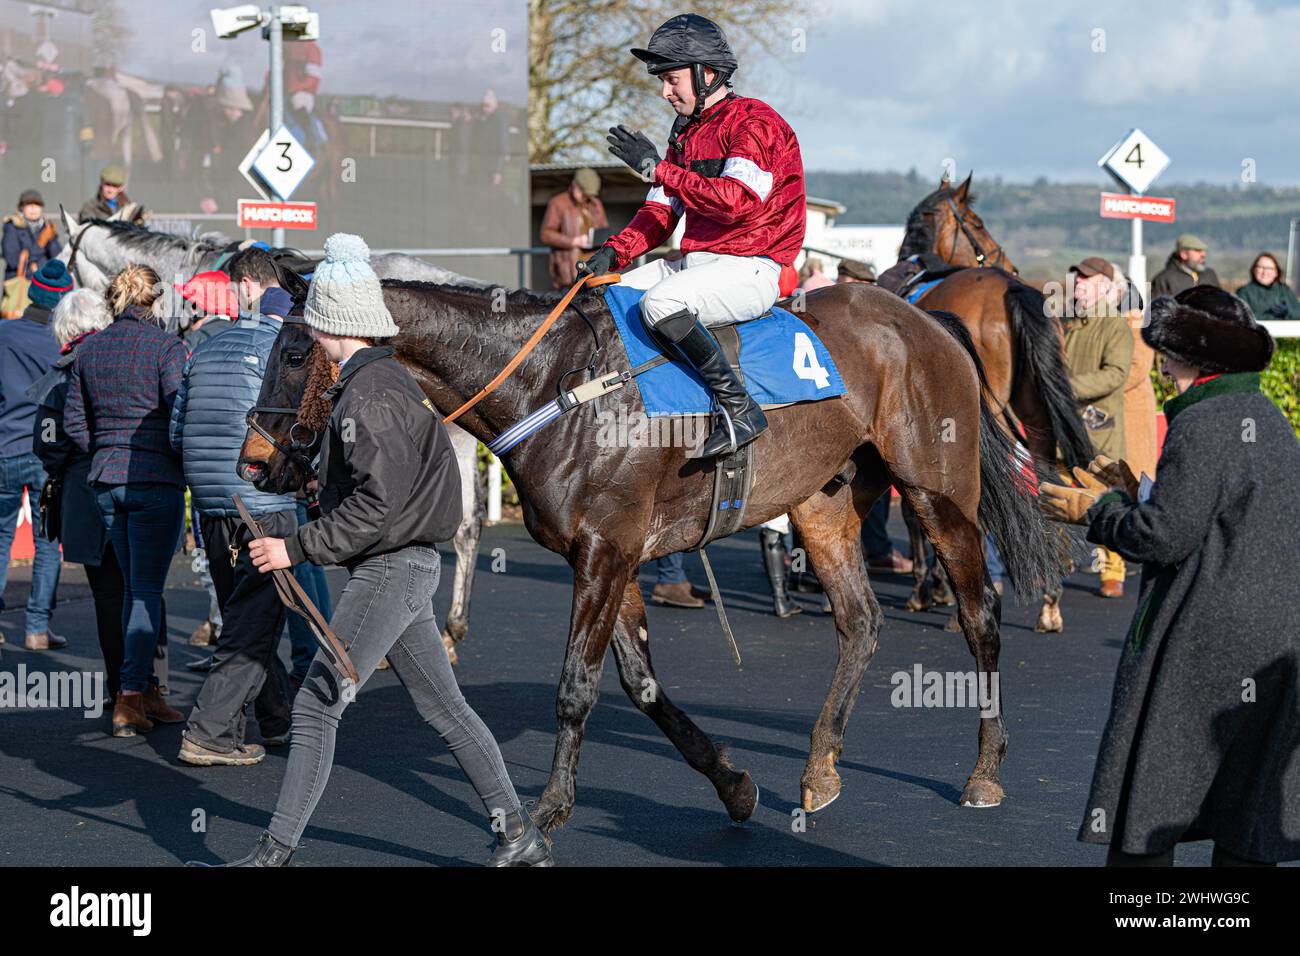 Second race at Wincanton, Saturday February 19th 2022, Steeple Chase Stock Photo